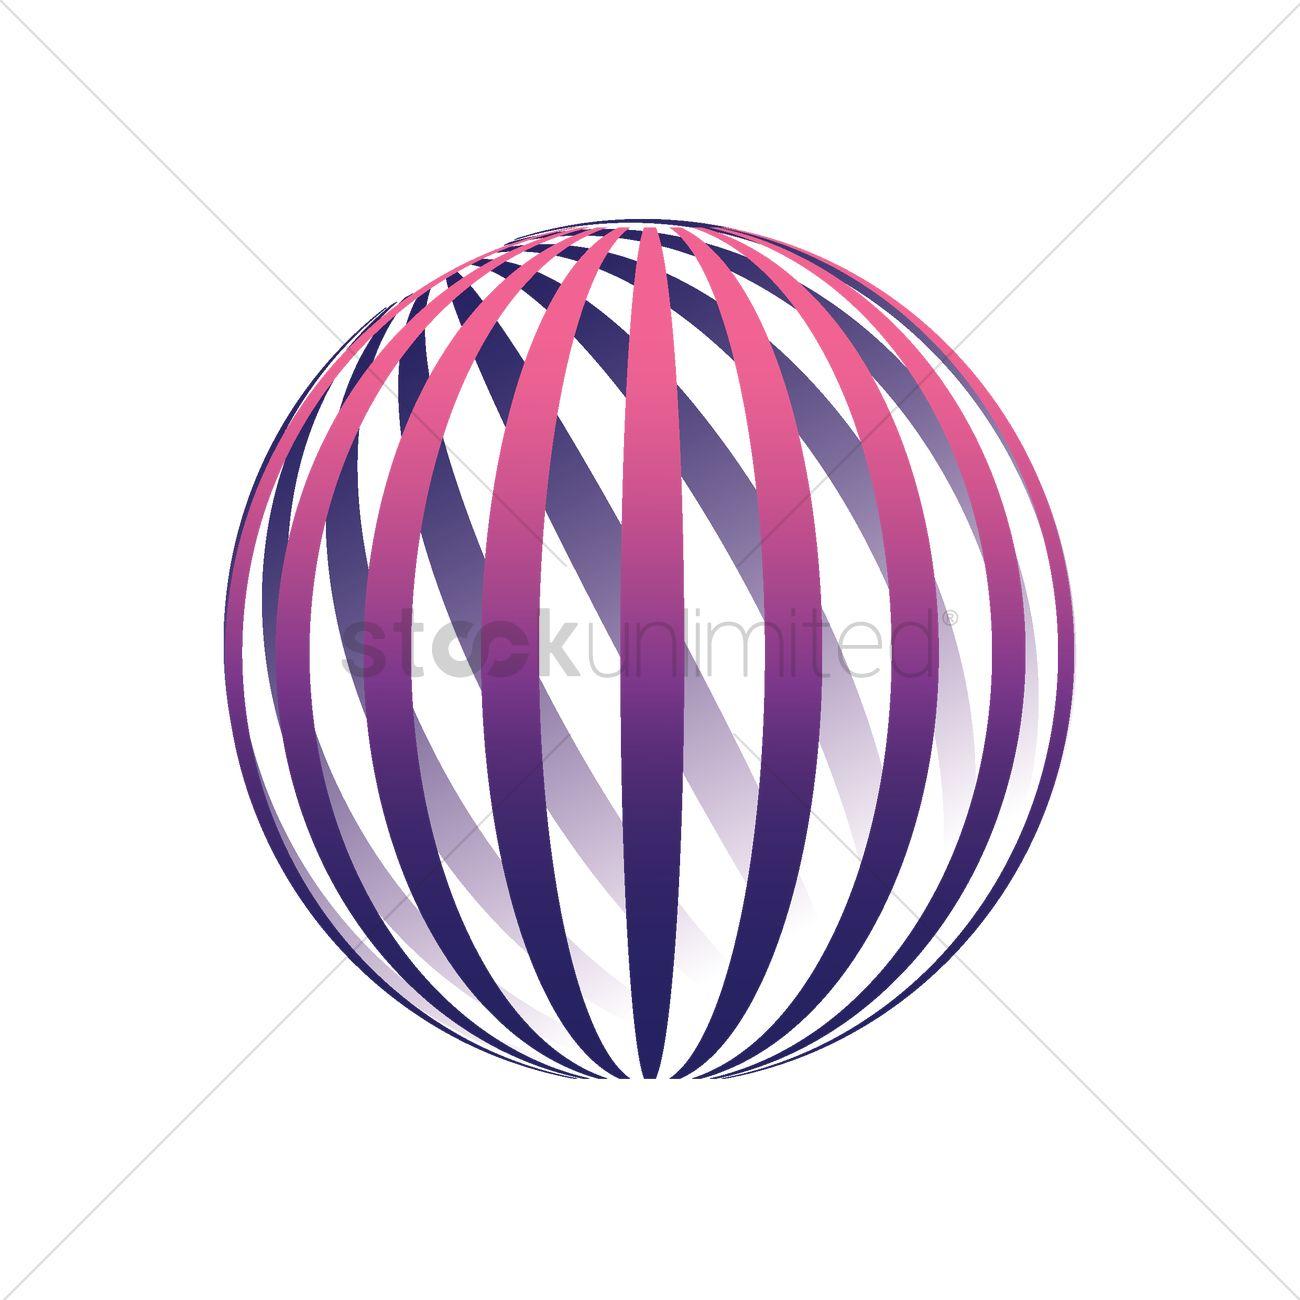 Globe with Lines Logo - Globe logo element with lines Vector Image - 2002424 | StockUnlimited